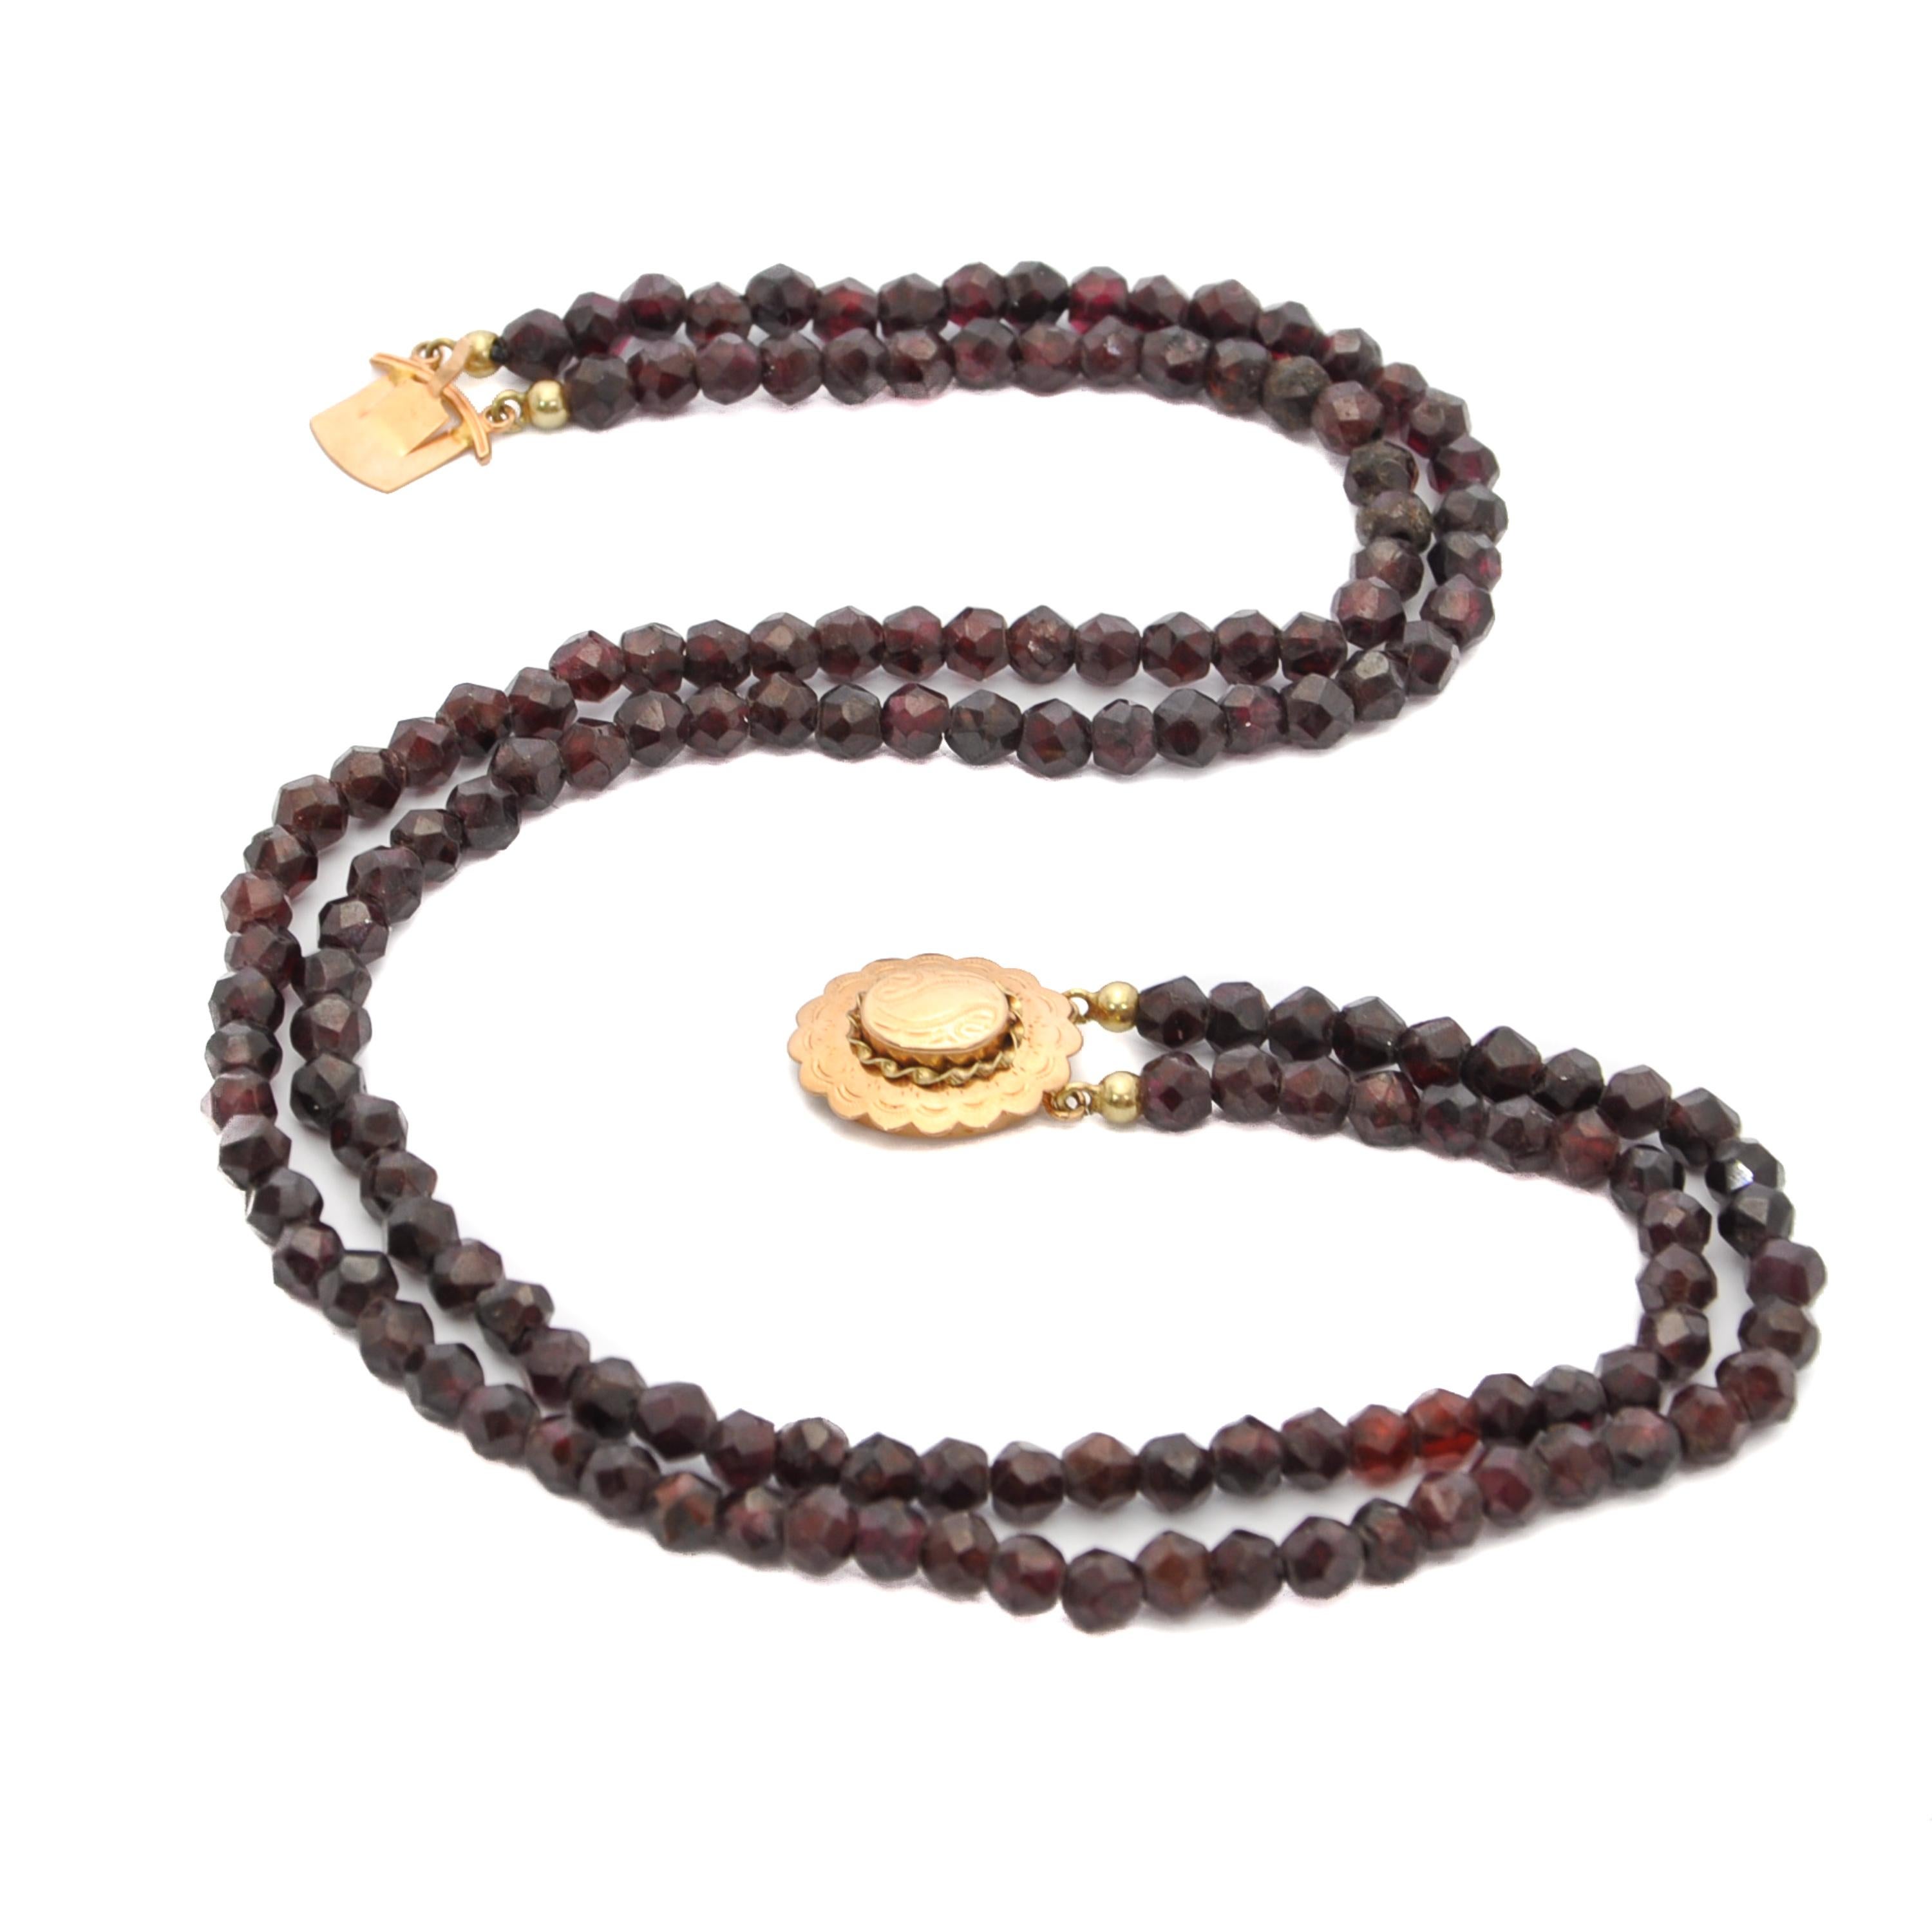 Antique 14K Gold and Garnet Two-Strand Beaded Necklace, Netherlands In Good Condition For Sale In Rotterdam, NL